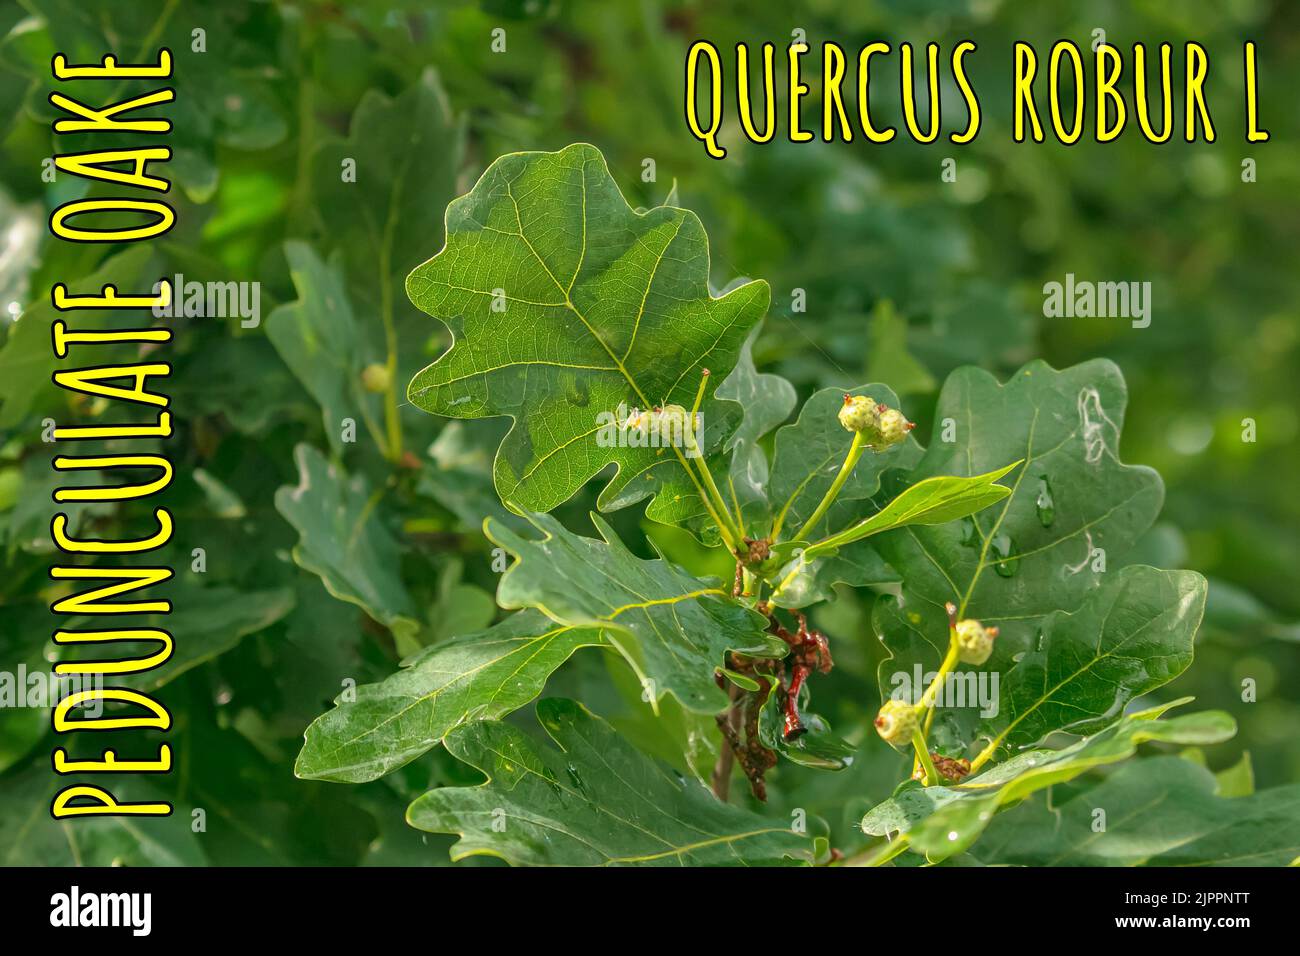 Branch of PEDUNCULATE OAK with acorns in summer. The Latin name for this tree is QUERCUS ROBUR L. Stock Photo